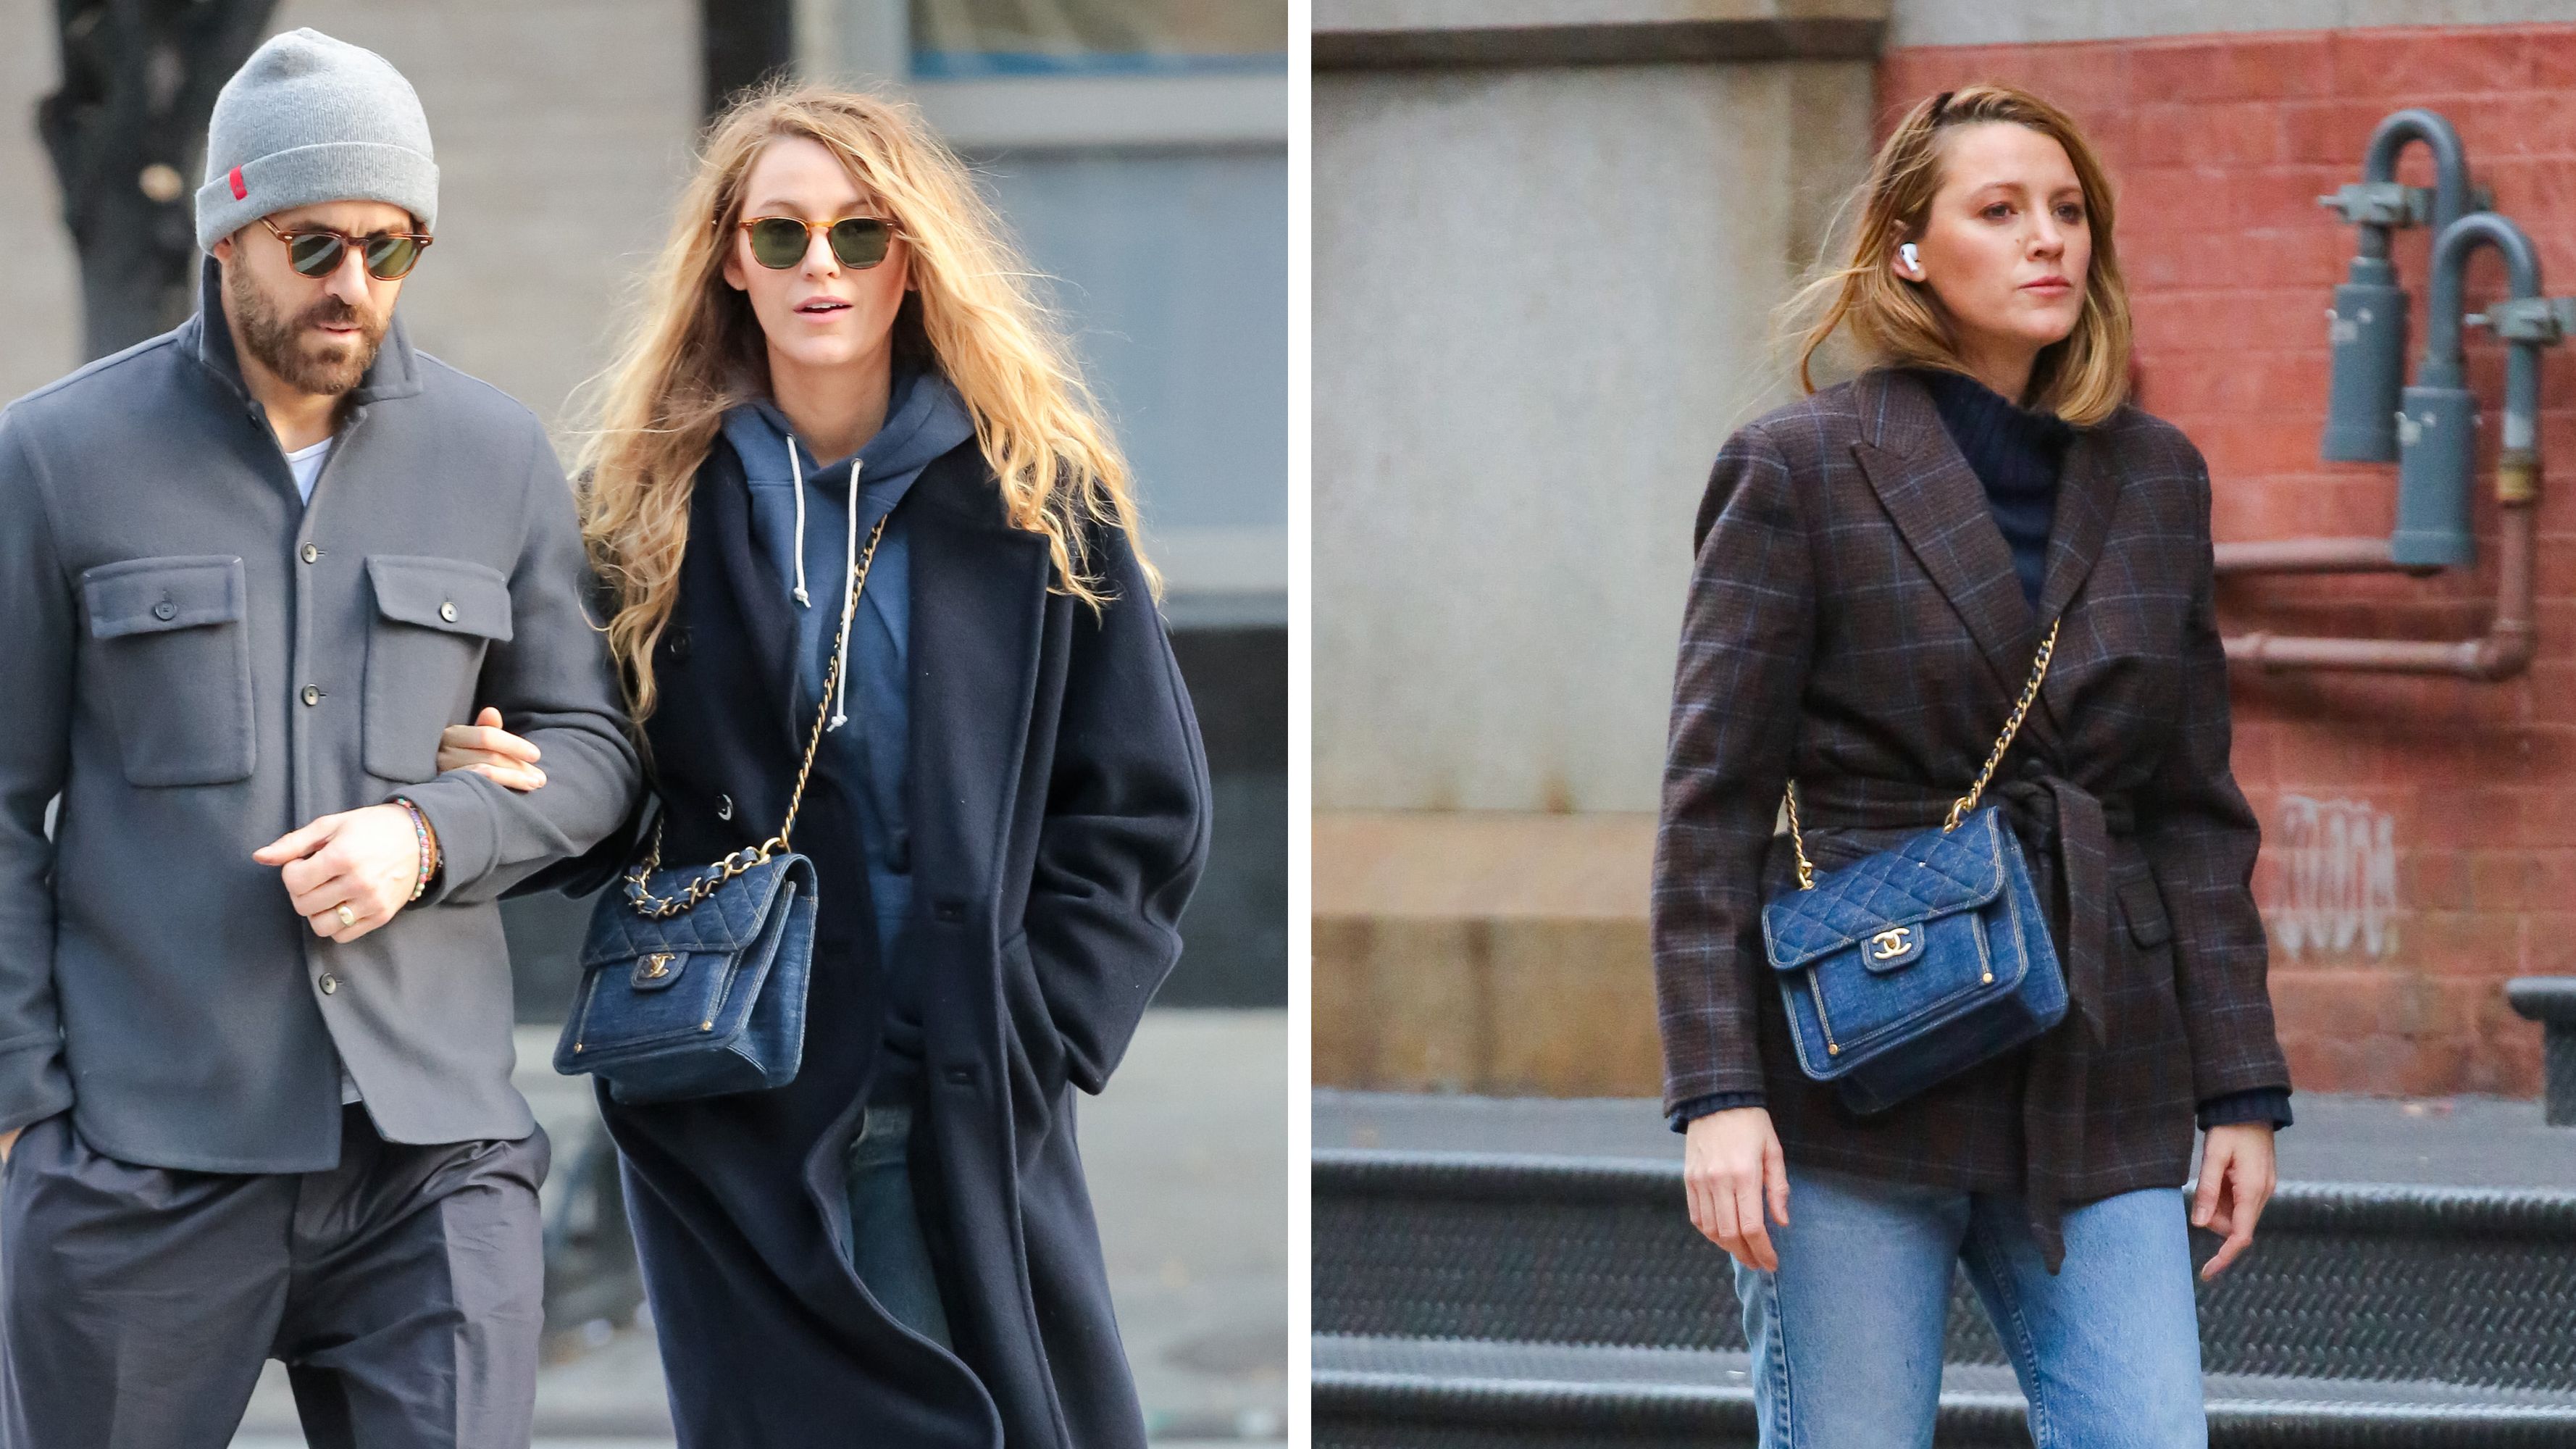 Blake Lively is Effortlessly Chic in Chanel